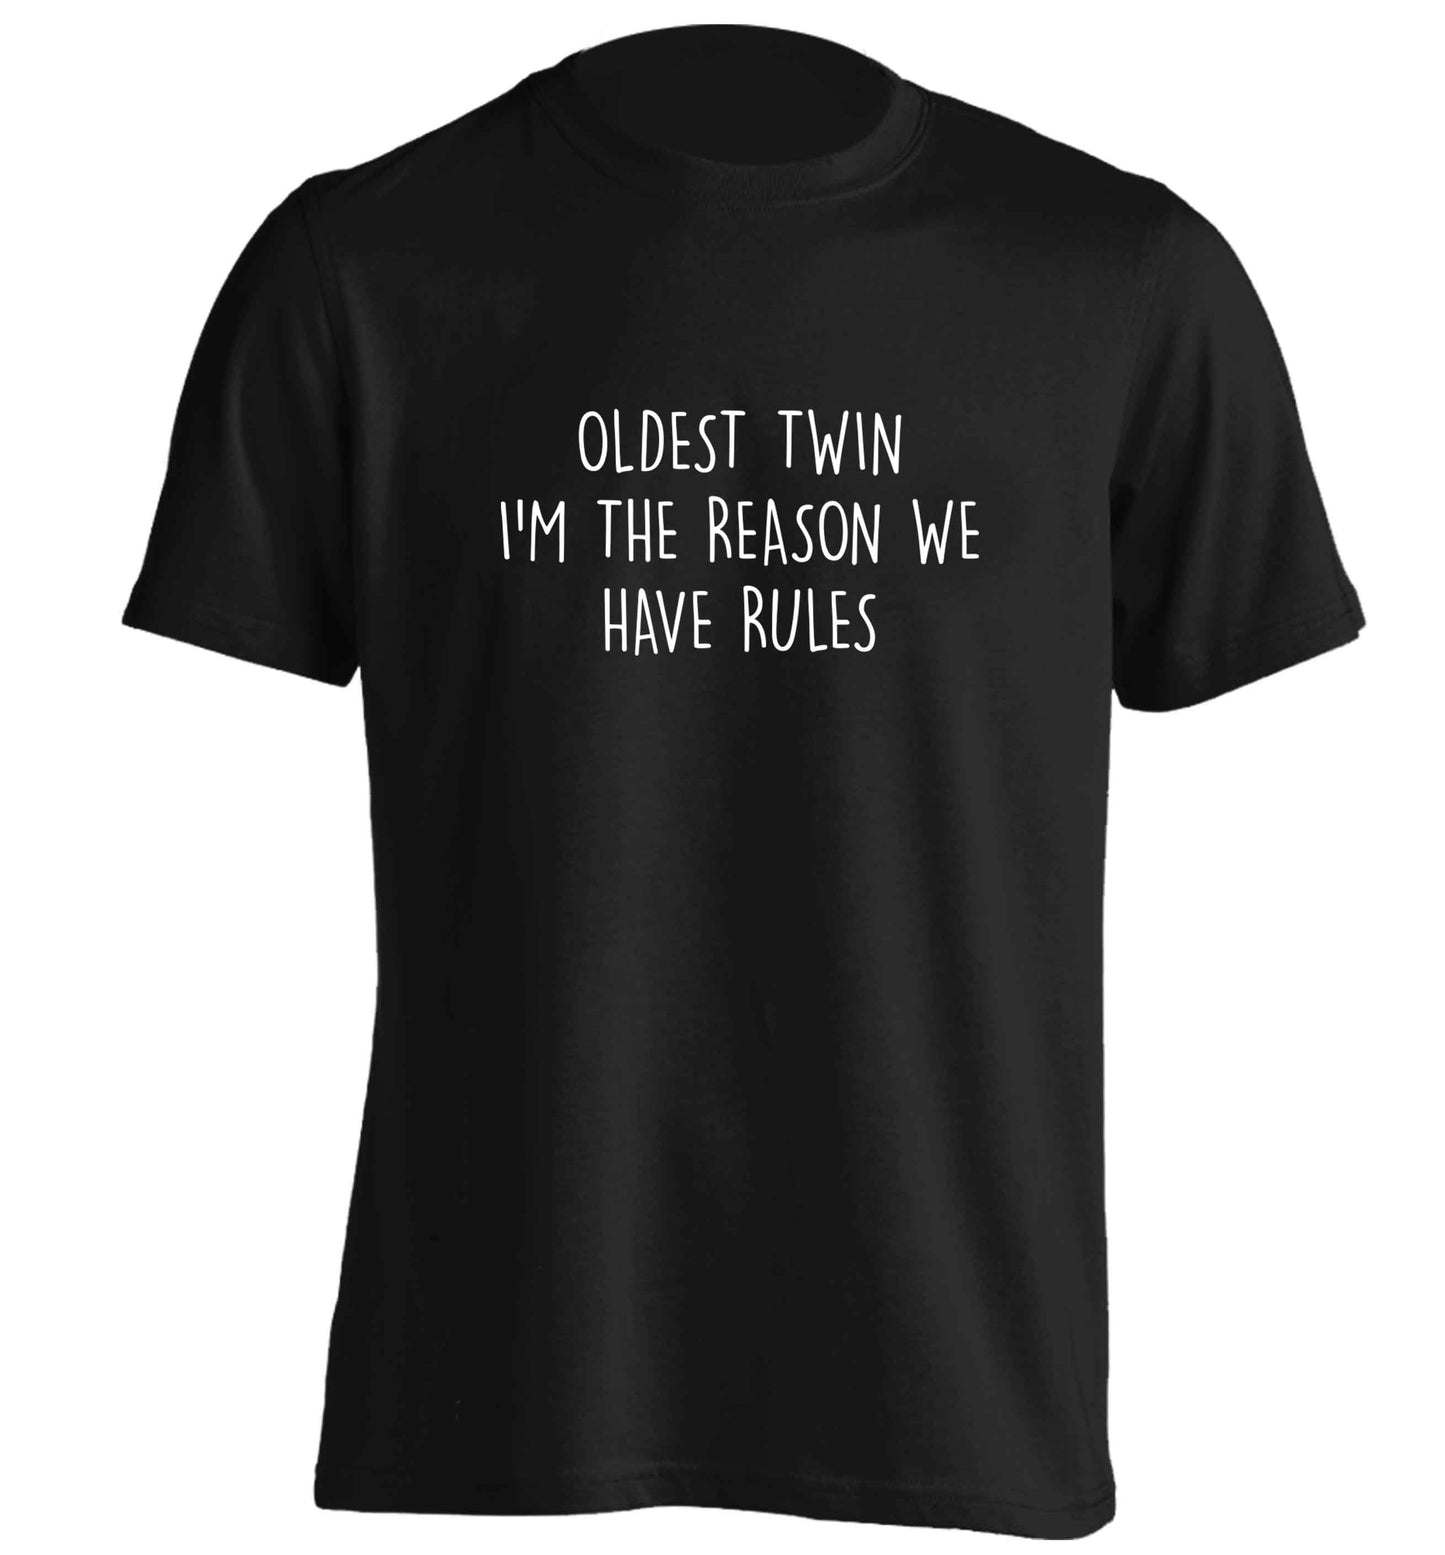 Oldest twin I'm the reason we have rules adults unisex black Tshirt 2XL